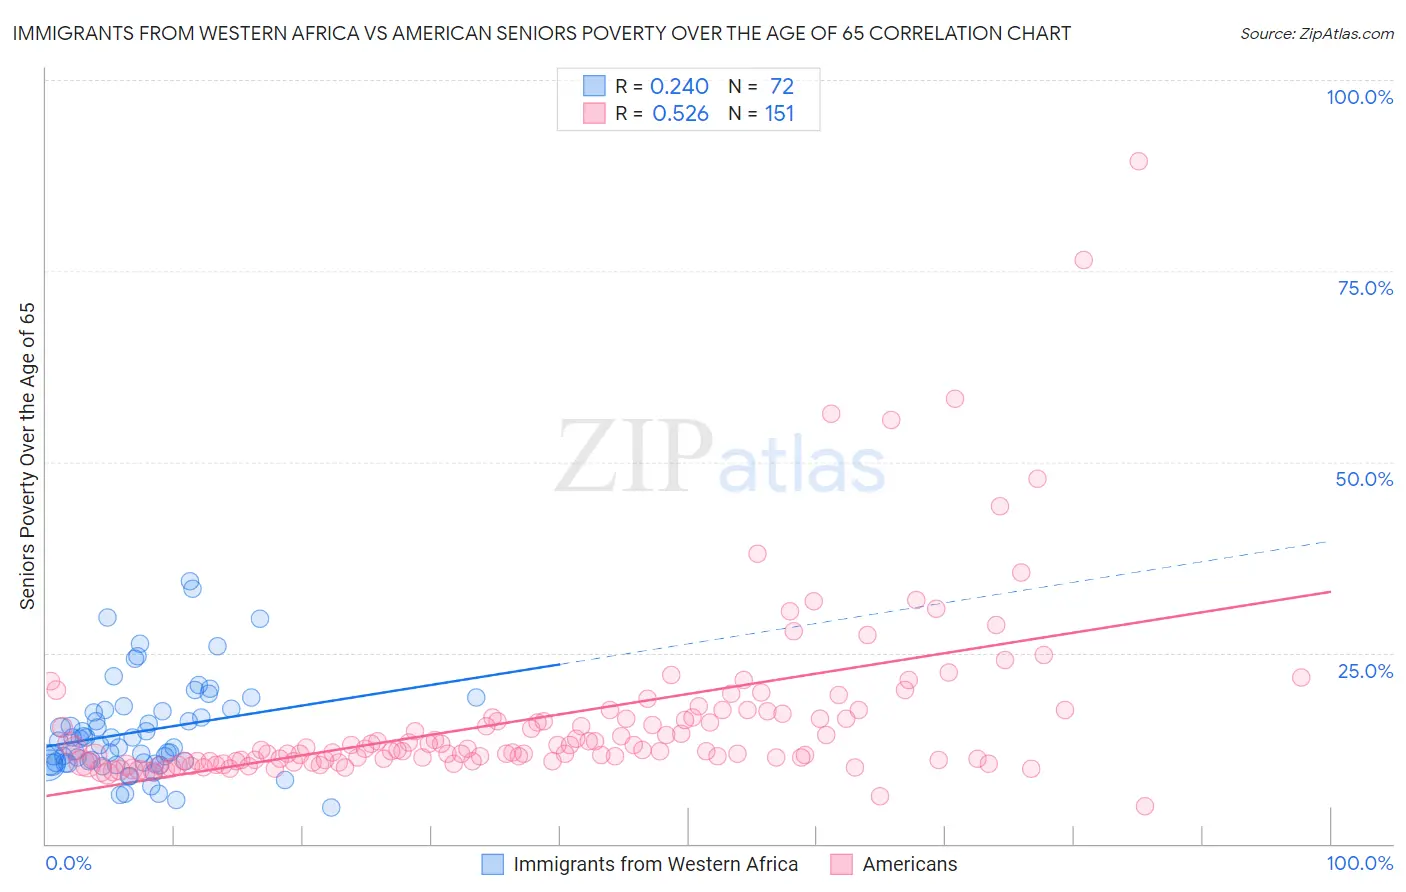 Immigrants from Western Africa vs American Seniors Poverty Over the Age of 65